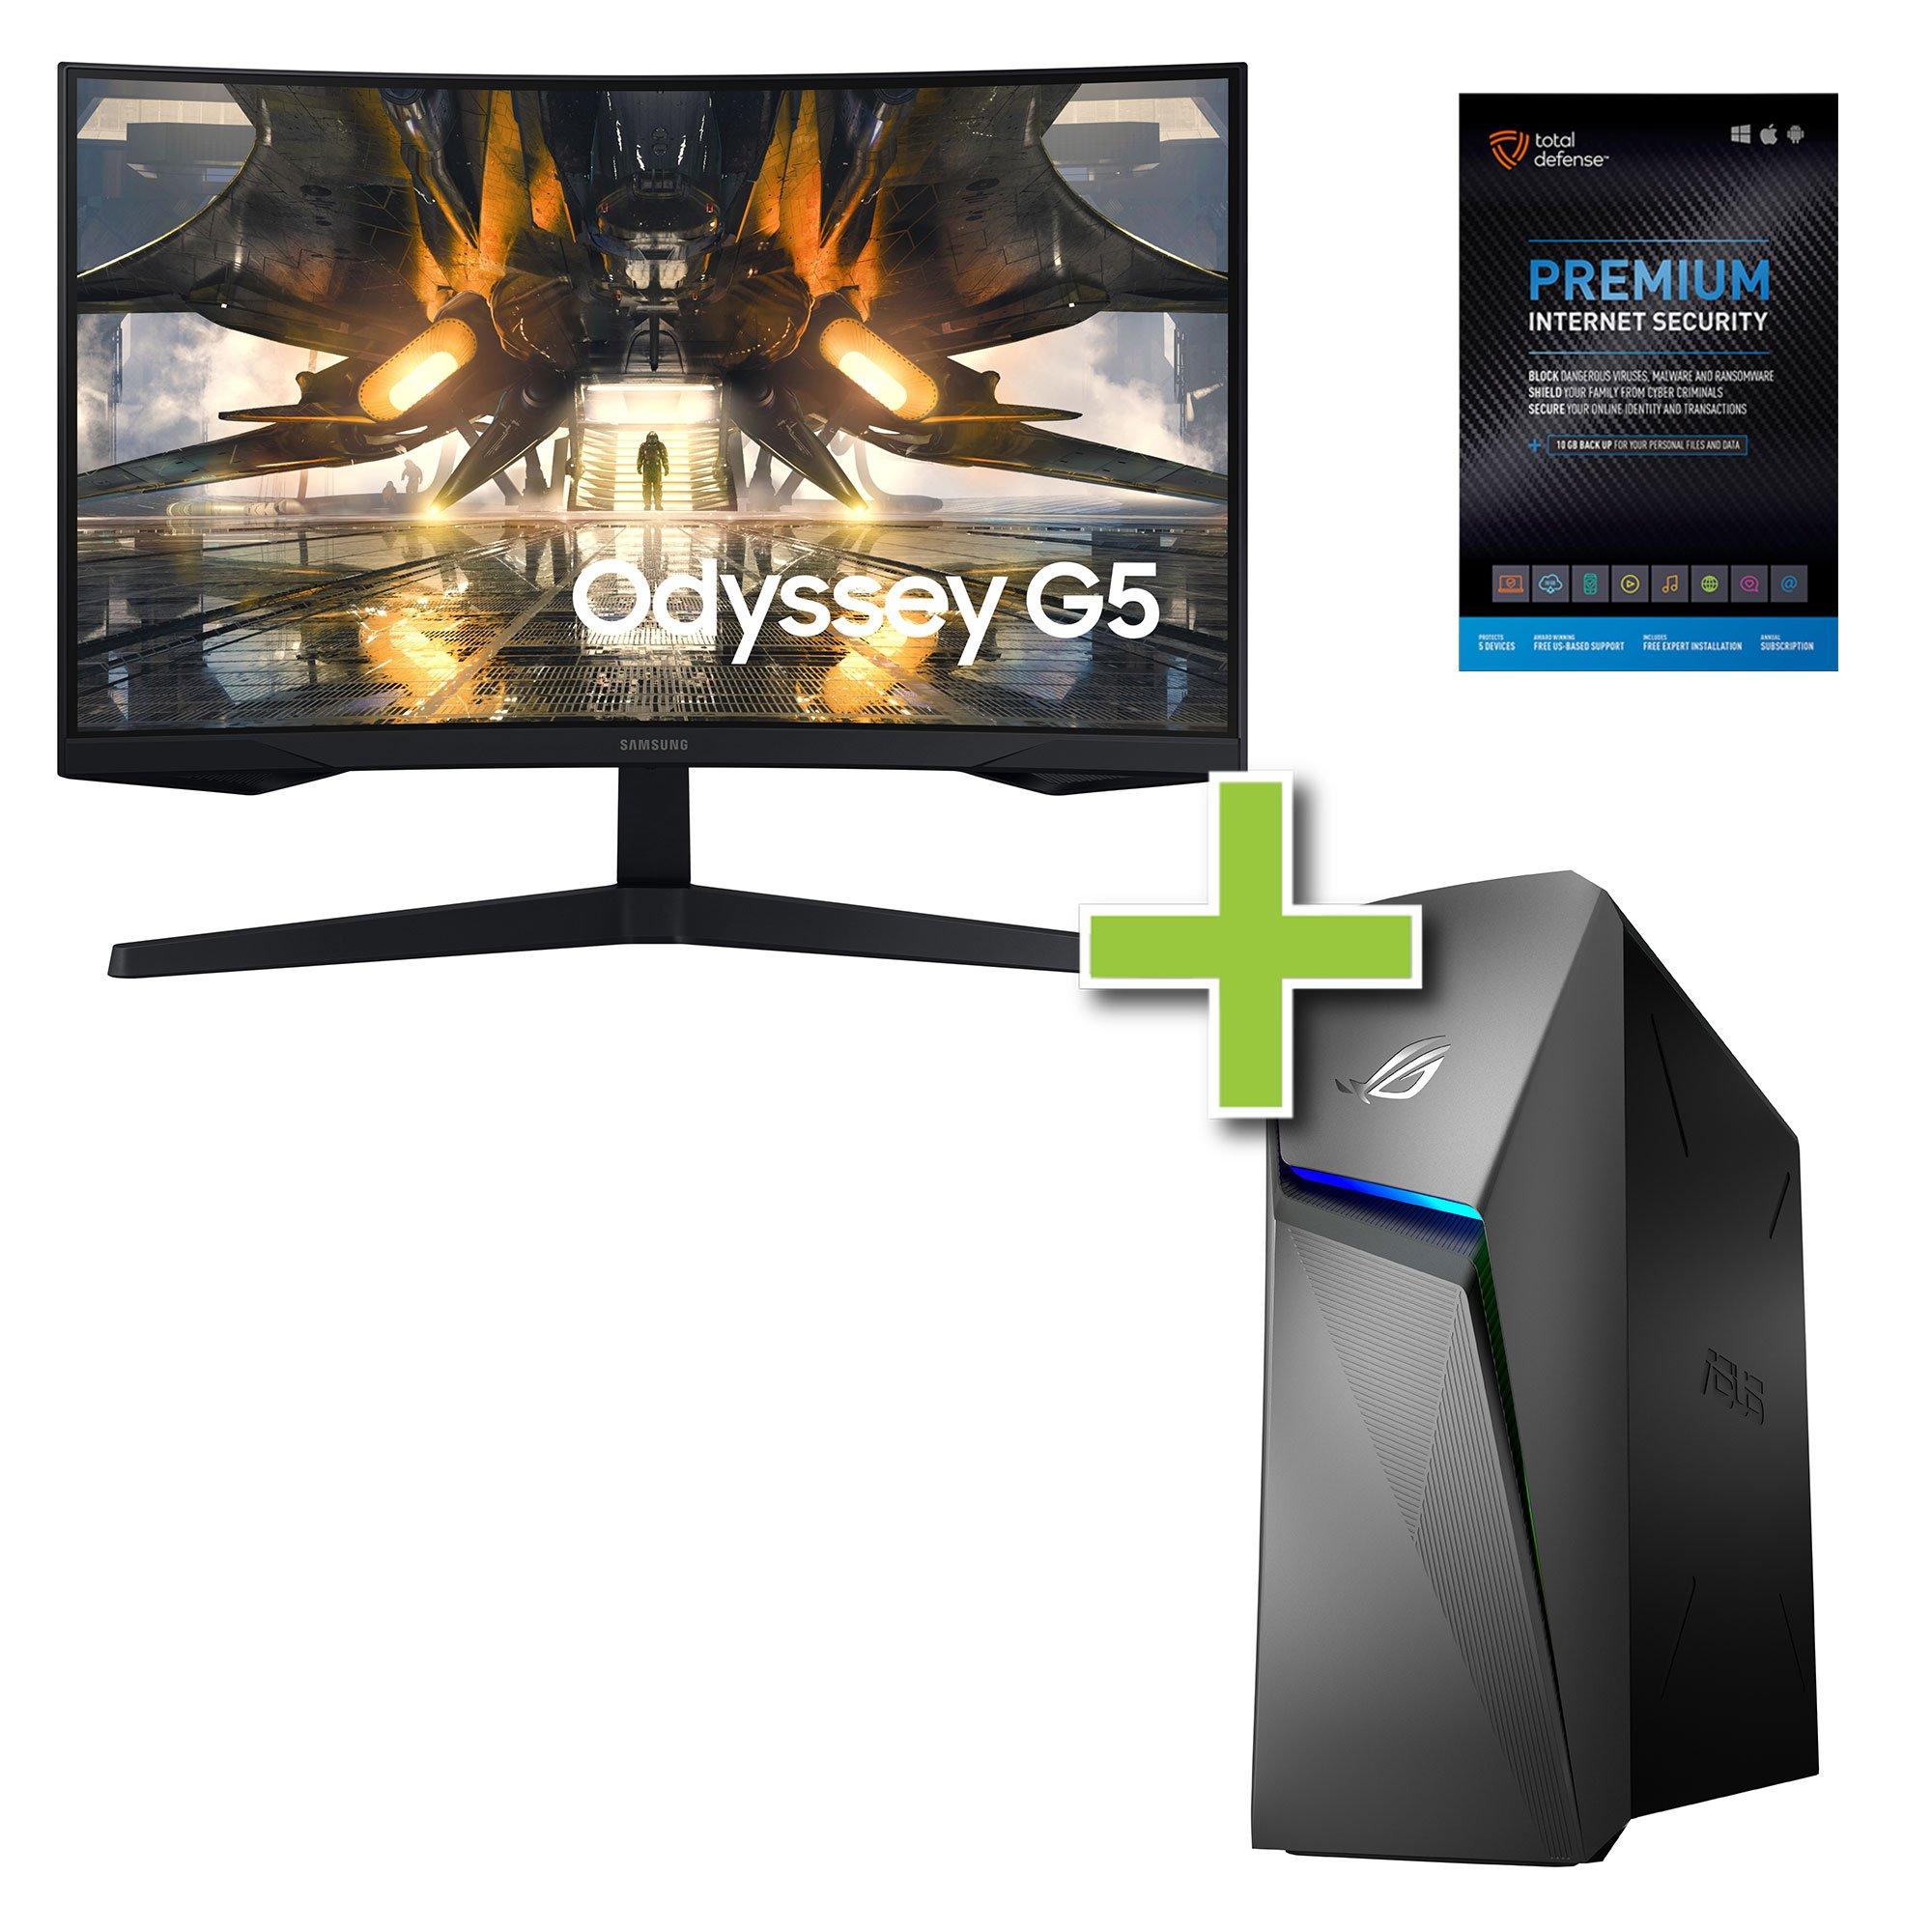 Rent to Own ASUS ASUS Gaming Desktop PC w/ Total Defense Internet Security  & 27 Curved Monitor at Aaron's today!